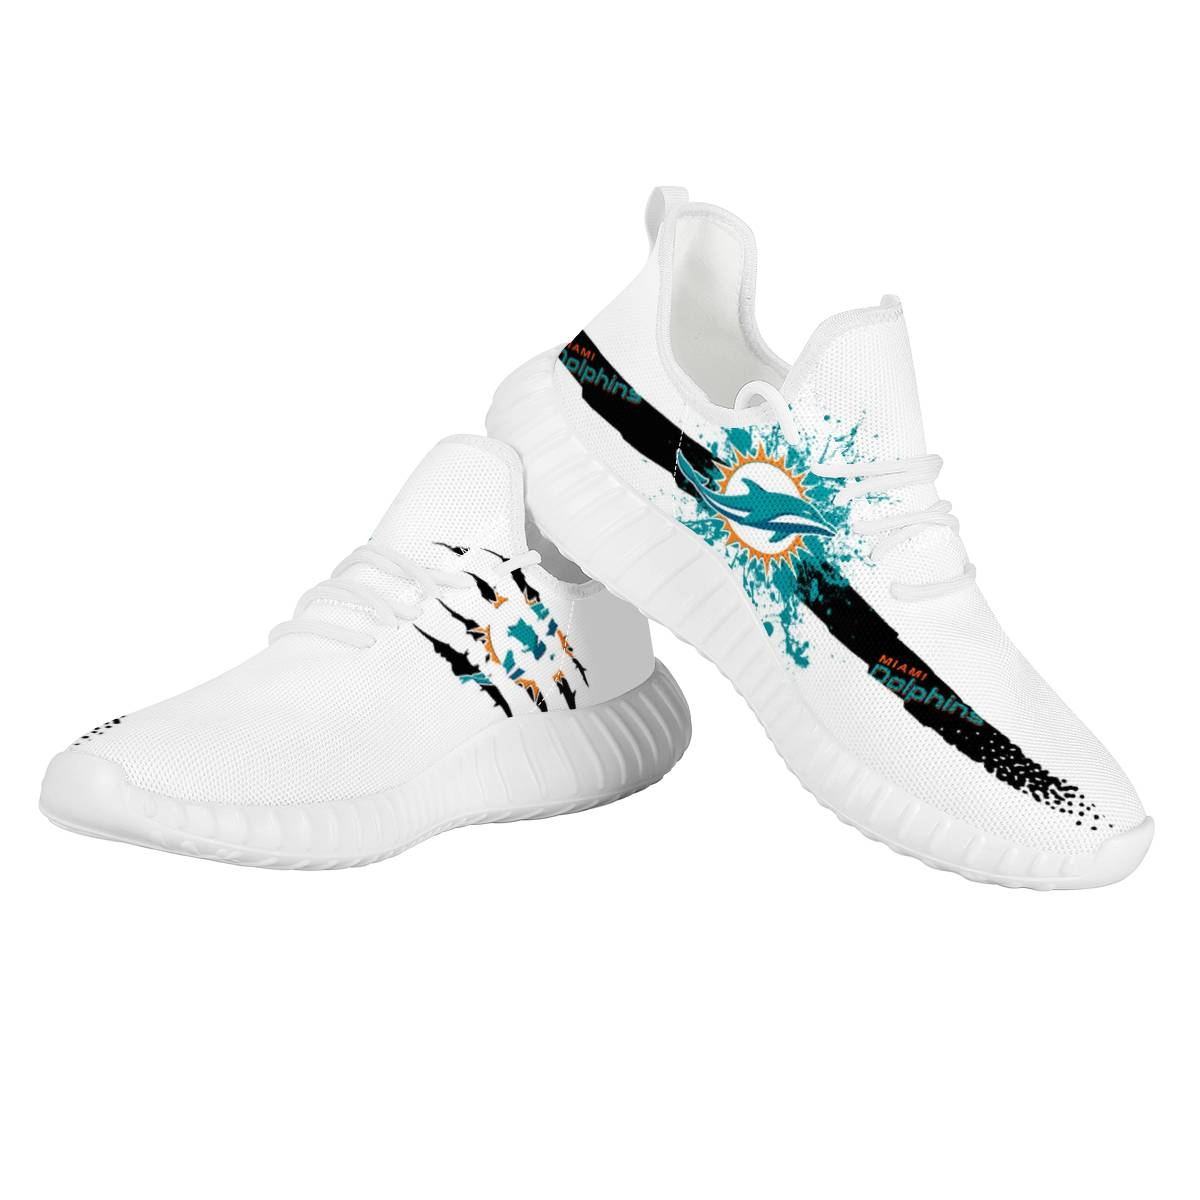 Women's Miami Dolphins Mesh Knit Sneakers/Shoes 010